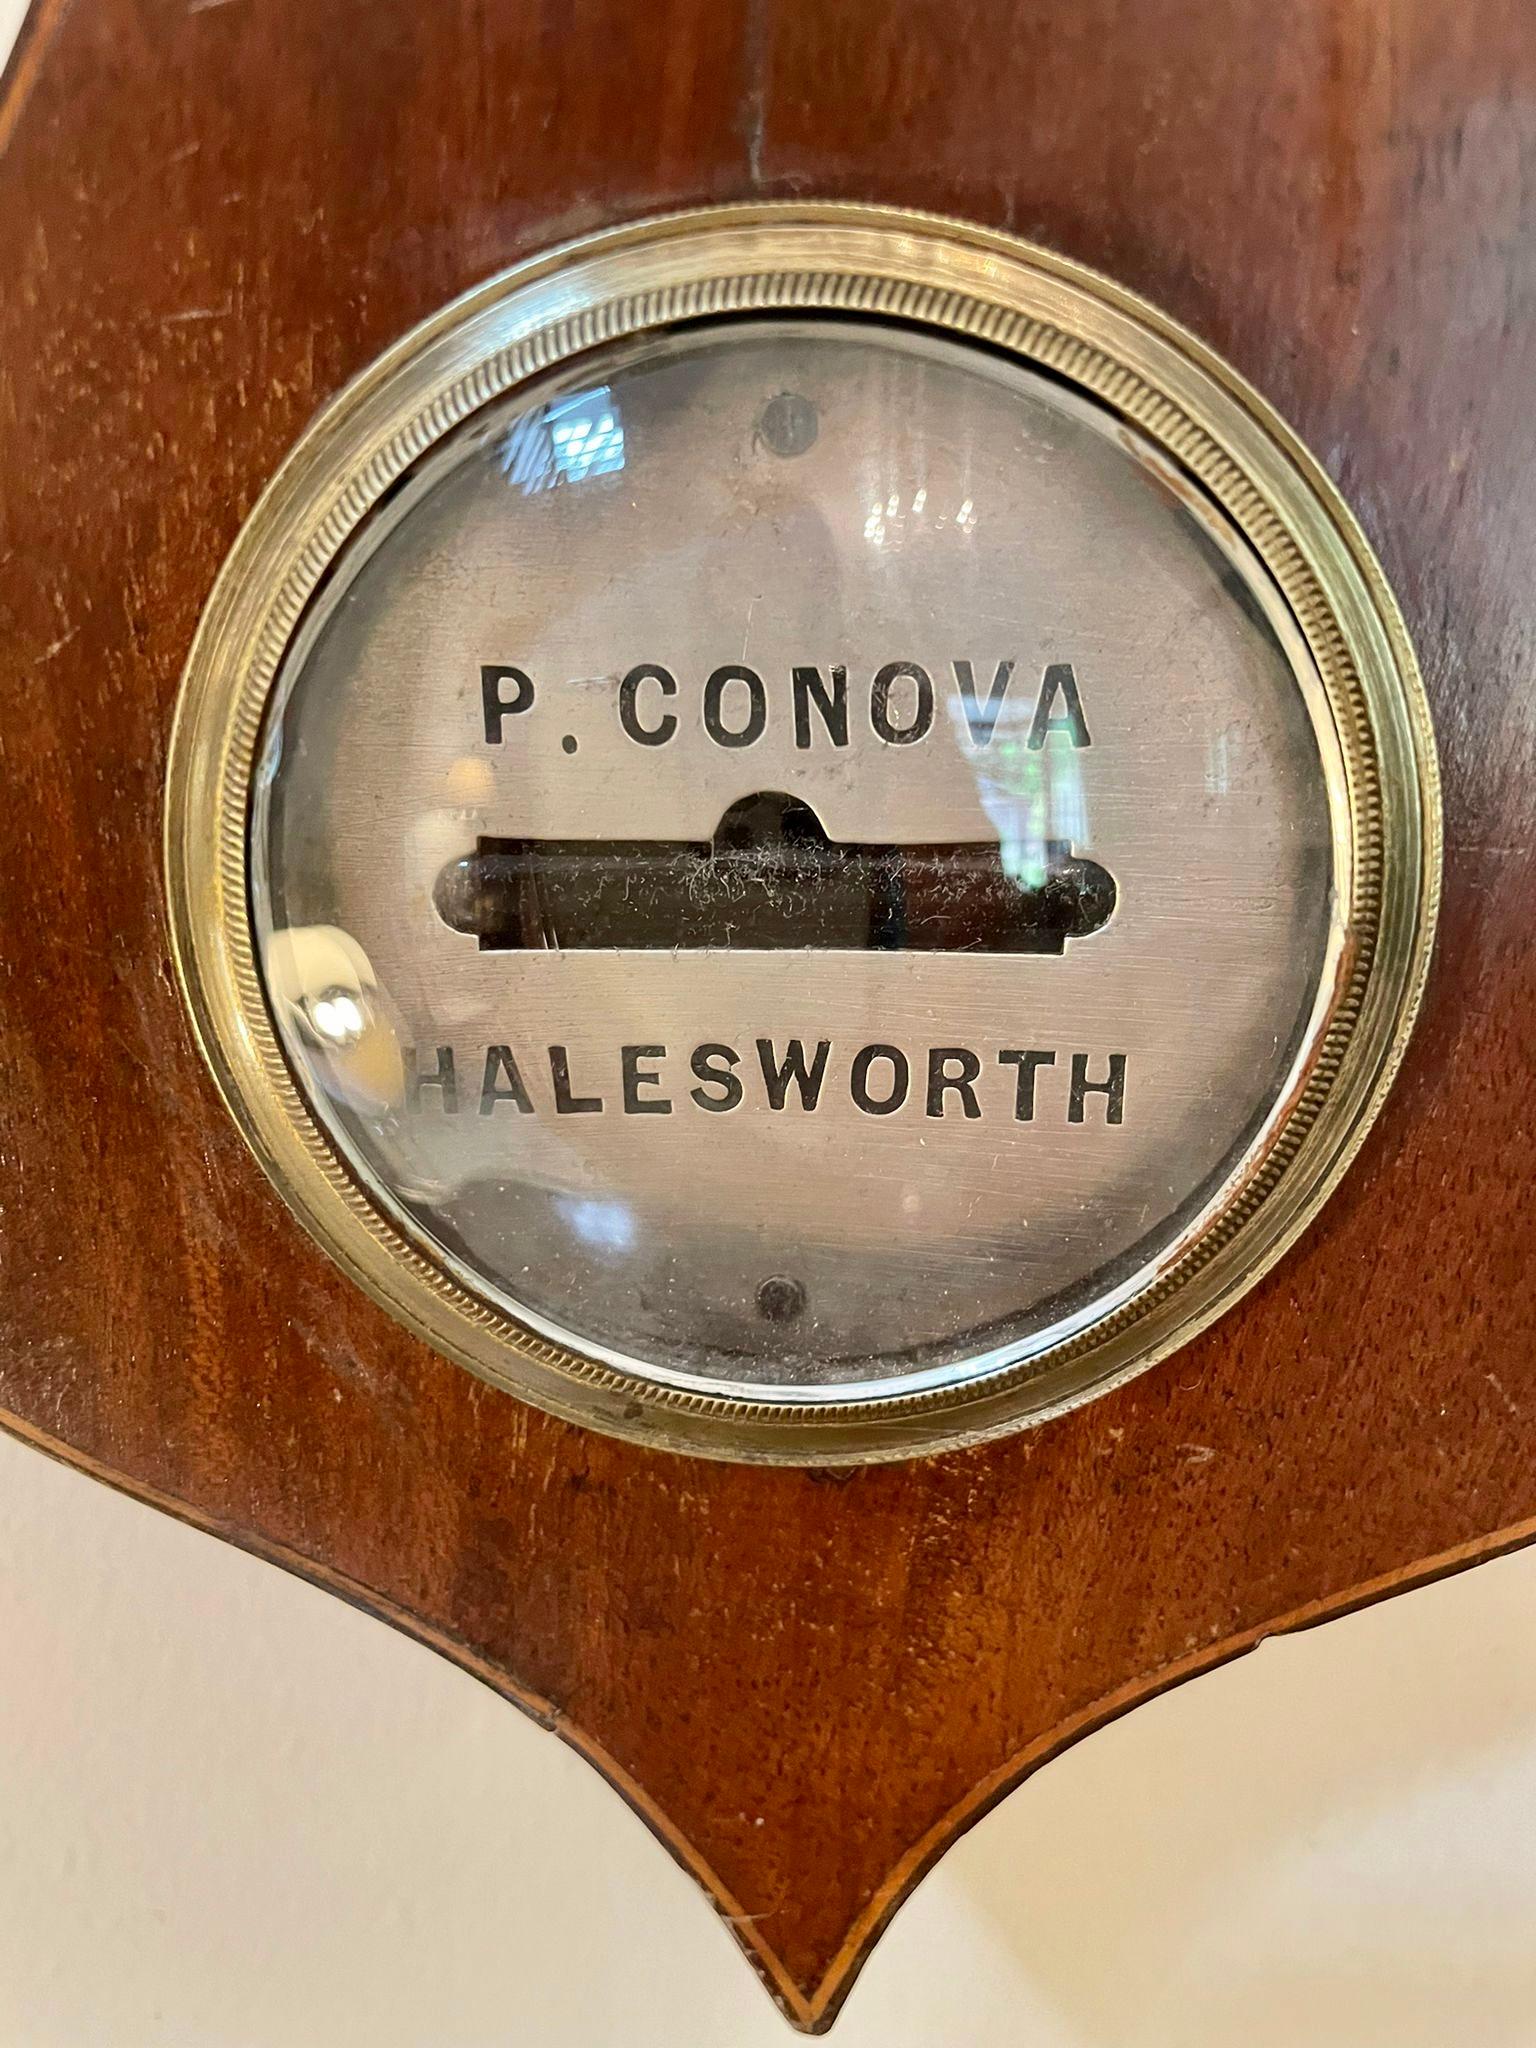 Antique 19th century rosewood banjo barometer having a quality rosewood case with an onion shaped top, nine inch silvered engraved dial with original hands, a thermometer, fitted hygrometer, glass fronted spirit level and a bone setting disc. Signed